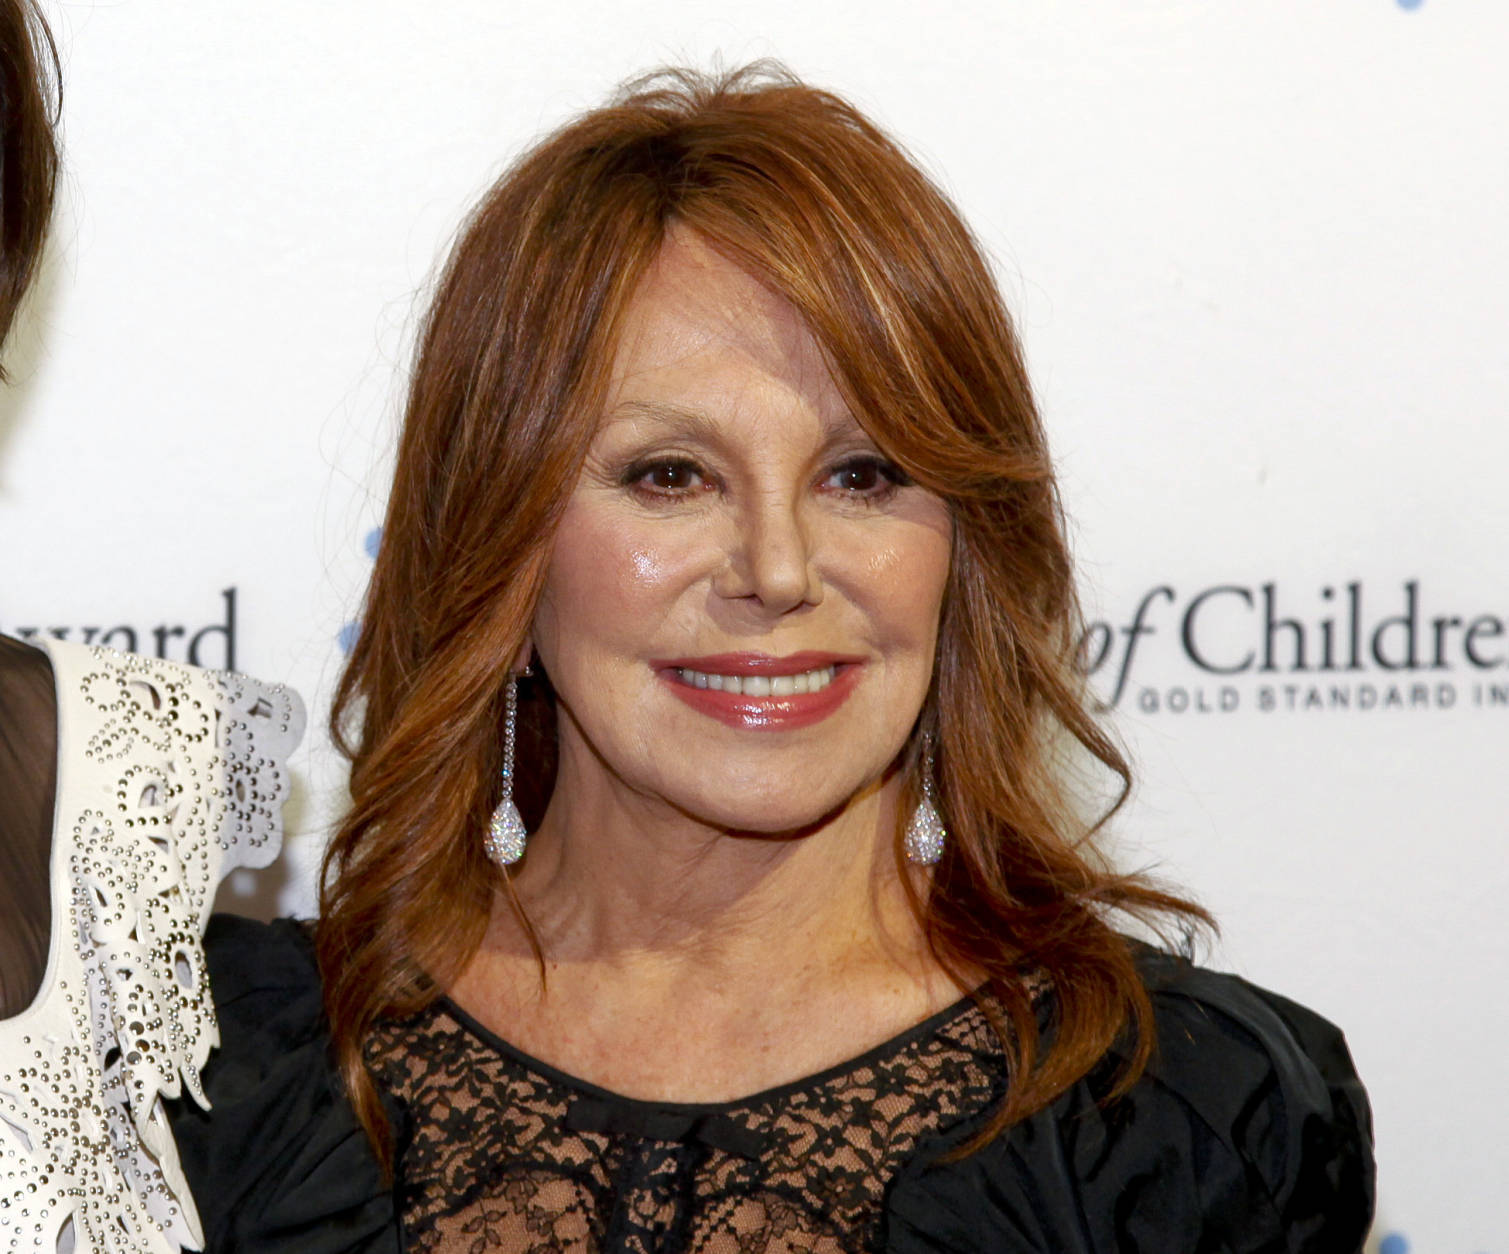 FILE - In this Nov. 6, 2014 file photo, Marlo Thomas attends the 2014 World of Children Awards in New York.  Producers said Tuesday, July 14, 2015 that Thomas will again star in Tony Award-winning playwright Joe DiPietros Clever Little Lies," at the Westside Theatre in September. Thomas will portray a woman trying to help her son save his marriage. (Photo by Andy Kropa/Invision/AP, File)